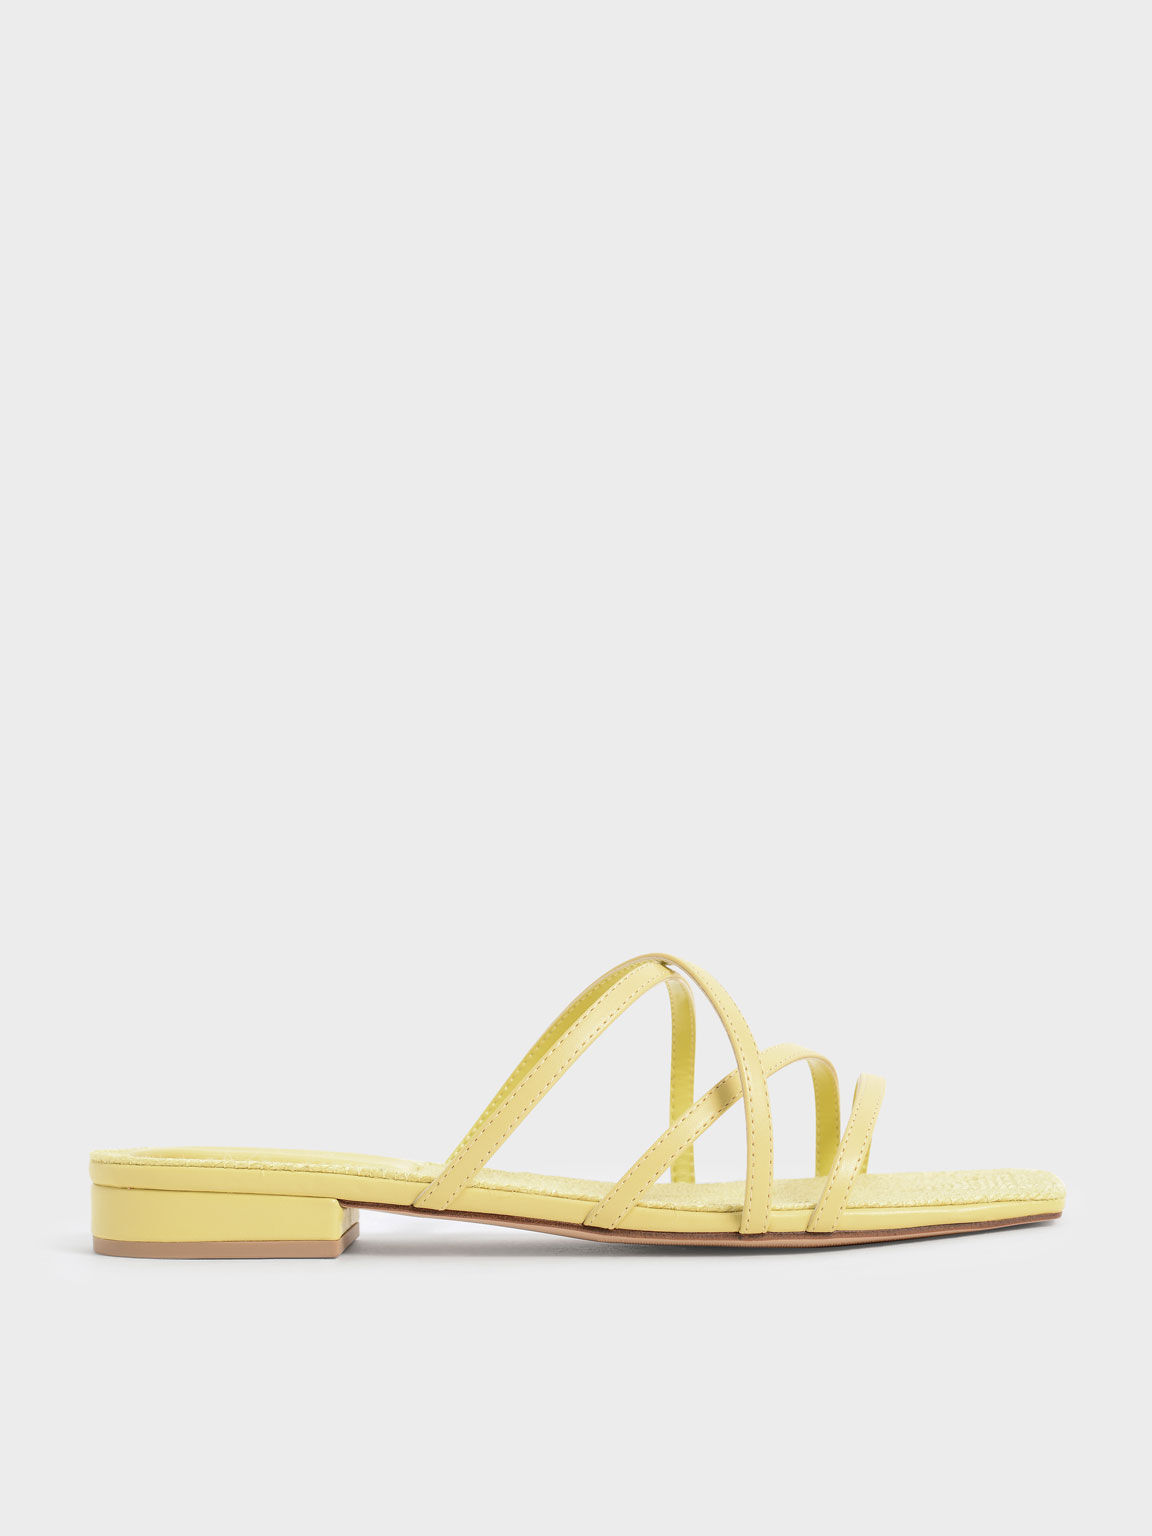 Strappy Square Toe Sandals, Yellow, hi-res